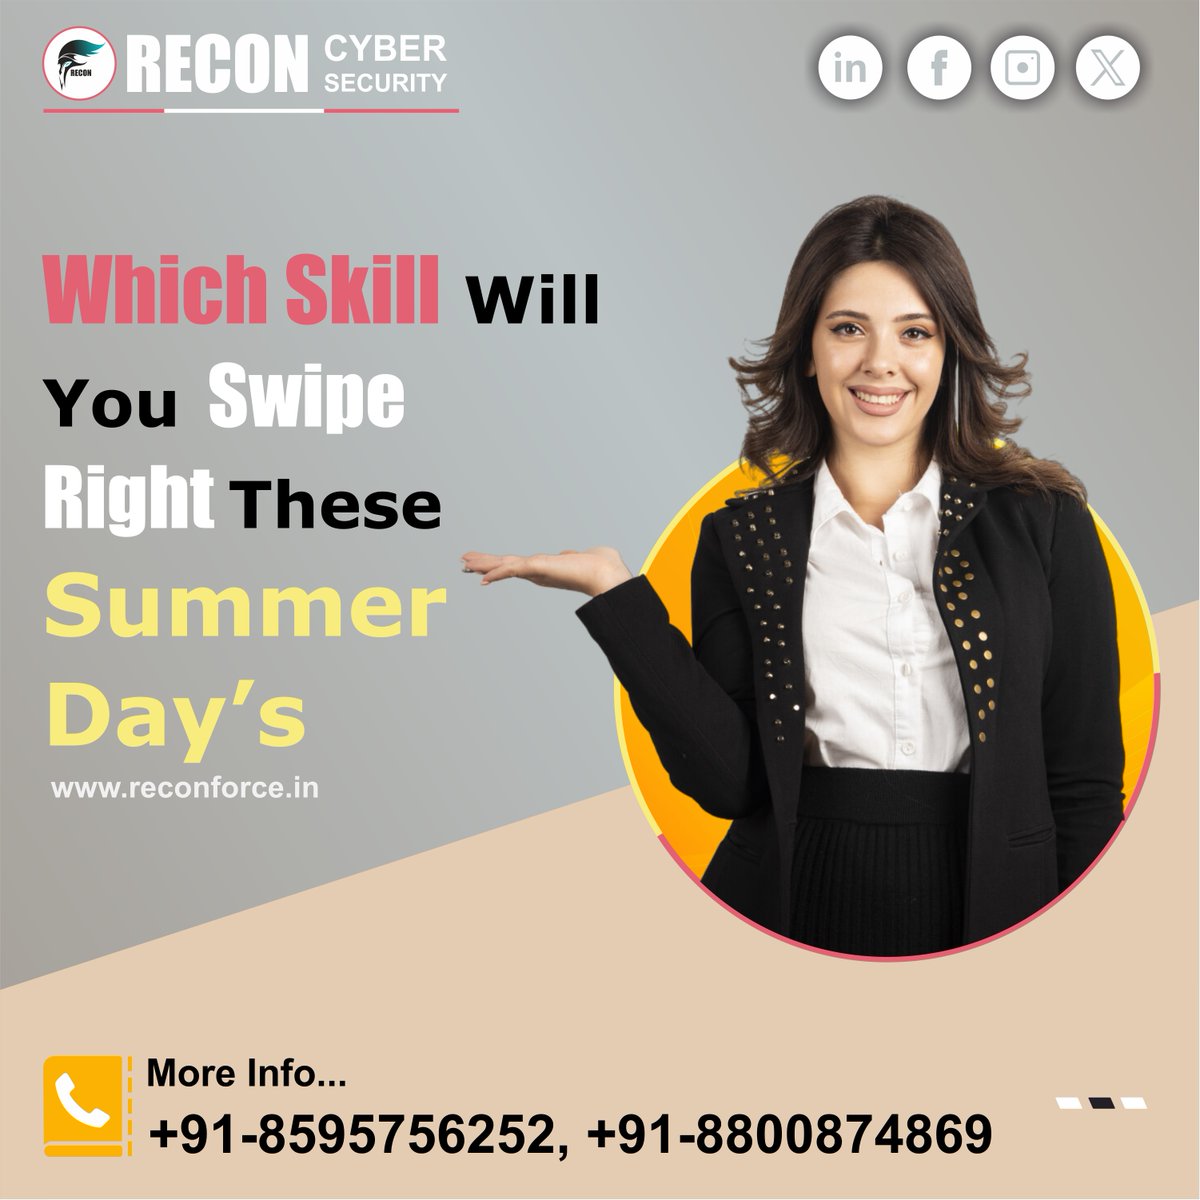 Looking for a new skill to sharpen this summer? Why not dive into the world of Recon Cyber Security?   join ReconForce Pvt.Ltd forms.gle/VxfXJSzBWjbLAN…   Visit for more info...

reconforce.in #CyberSecuritySkills #SummerLearning #LearnCyberSecurity